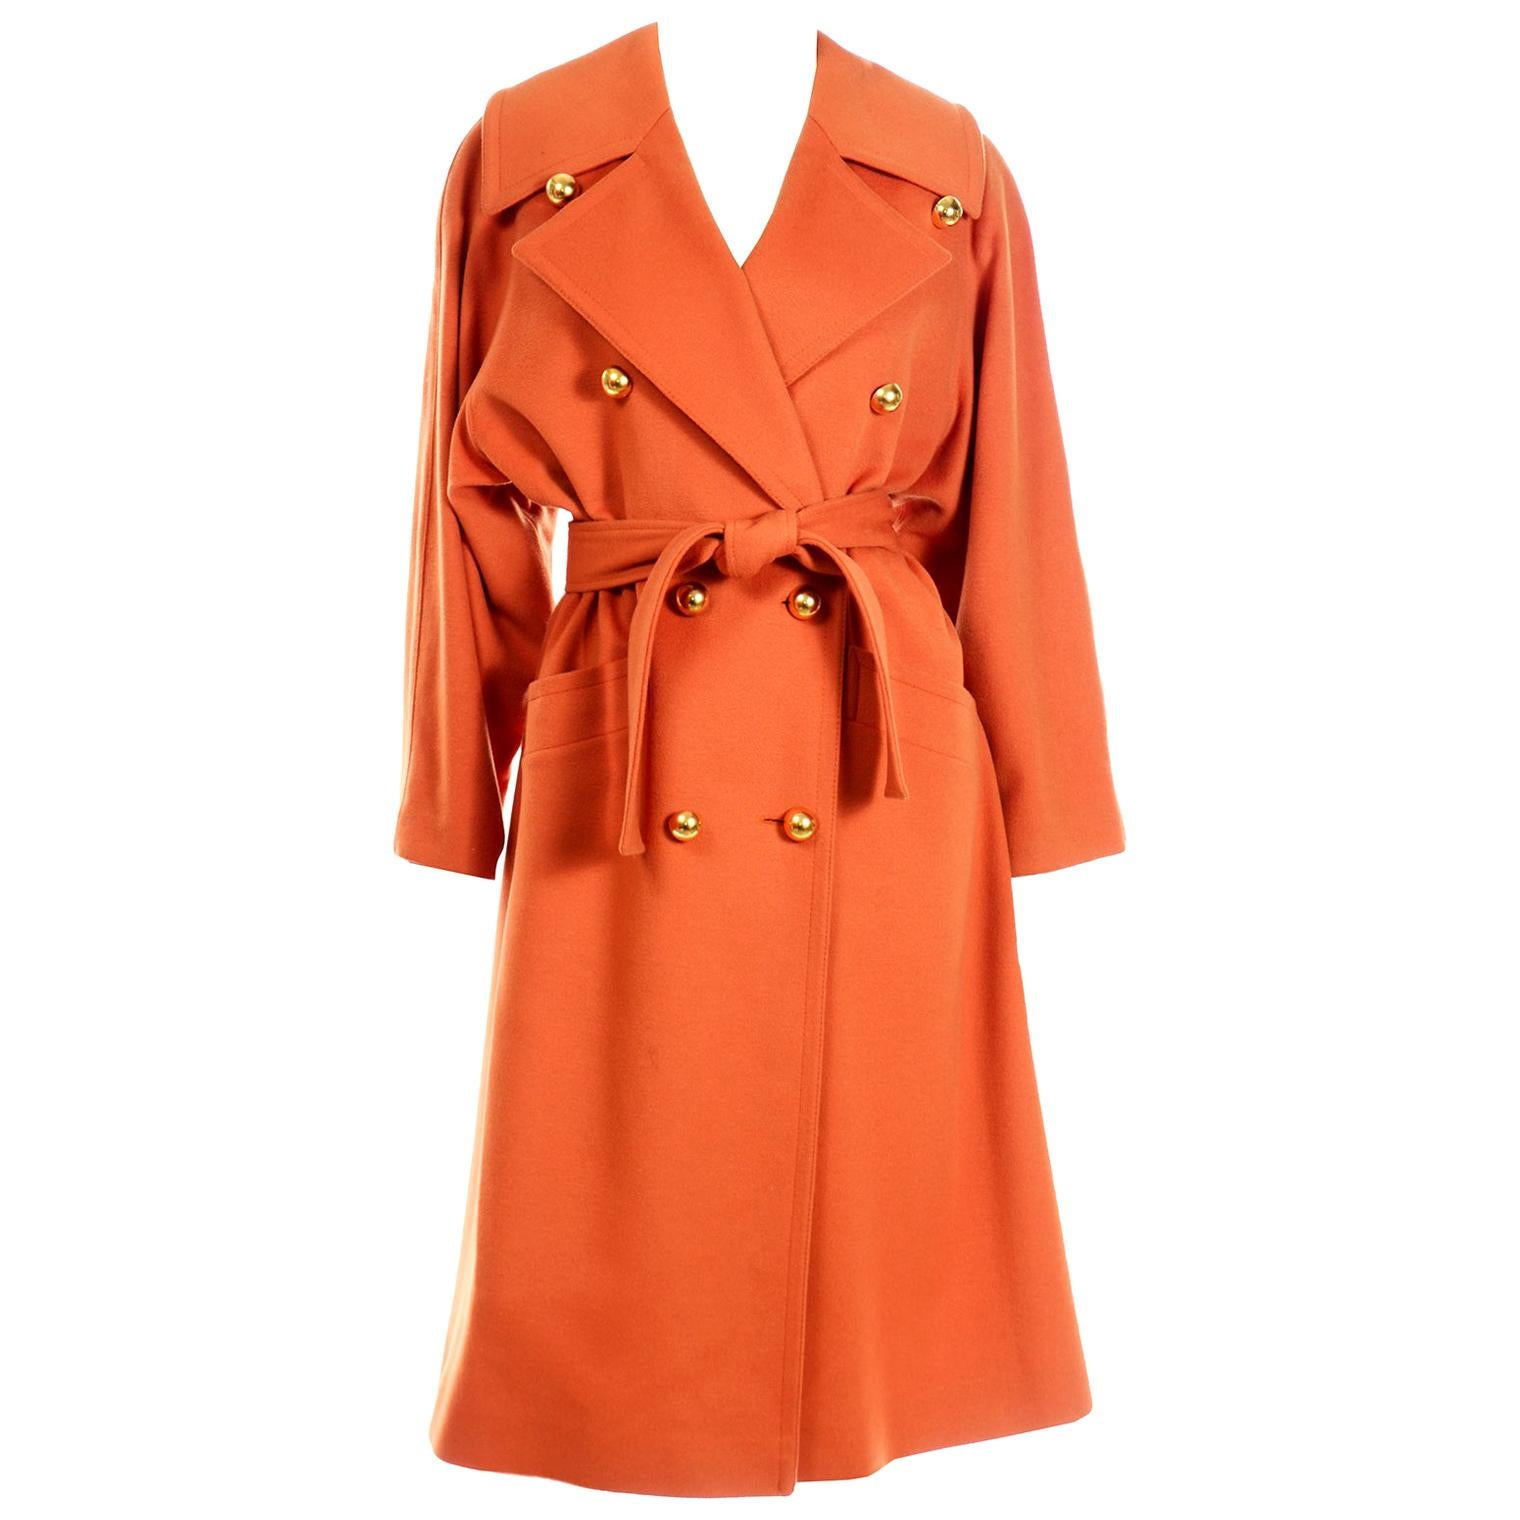 Guy Laroche Vintage Orange Cashmere Blend Double Breasted Trench Coat With Belt